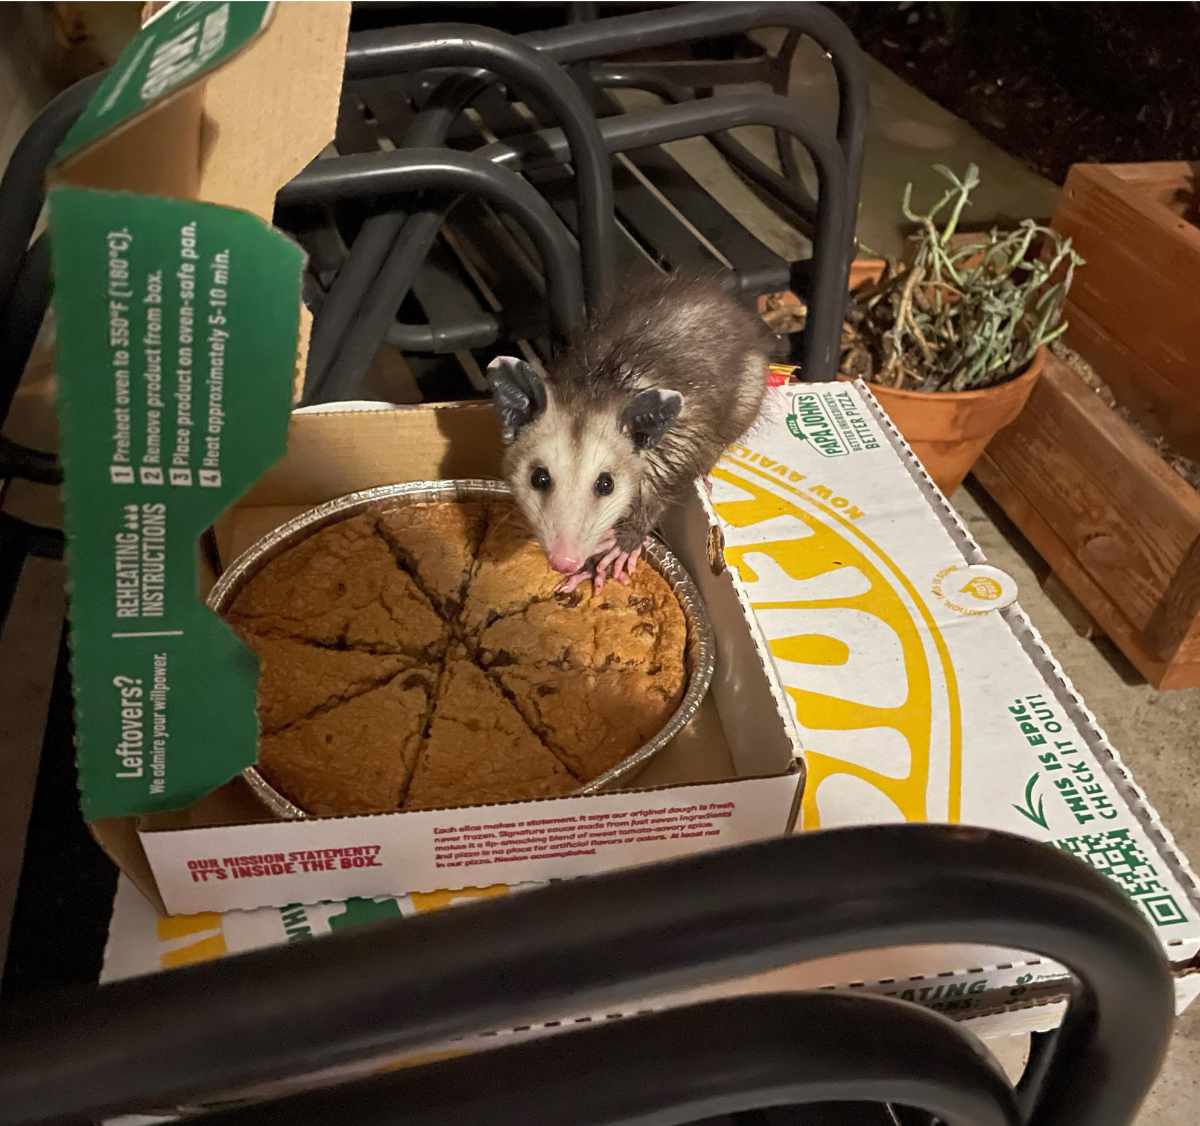 This little dude managed to open my pizza delivery within 20 seconds of the drop off